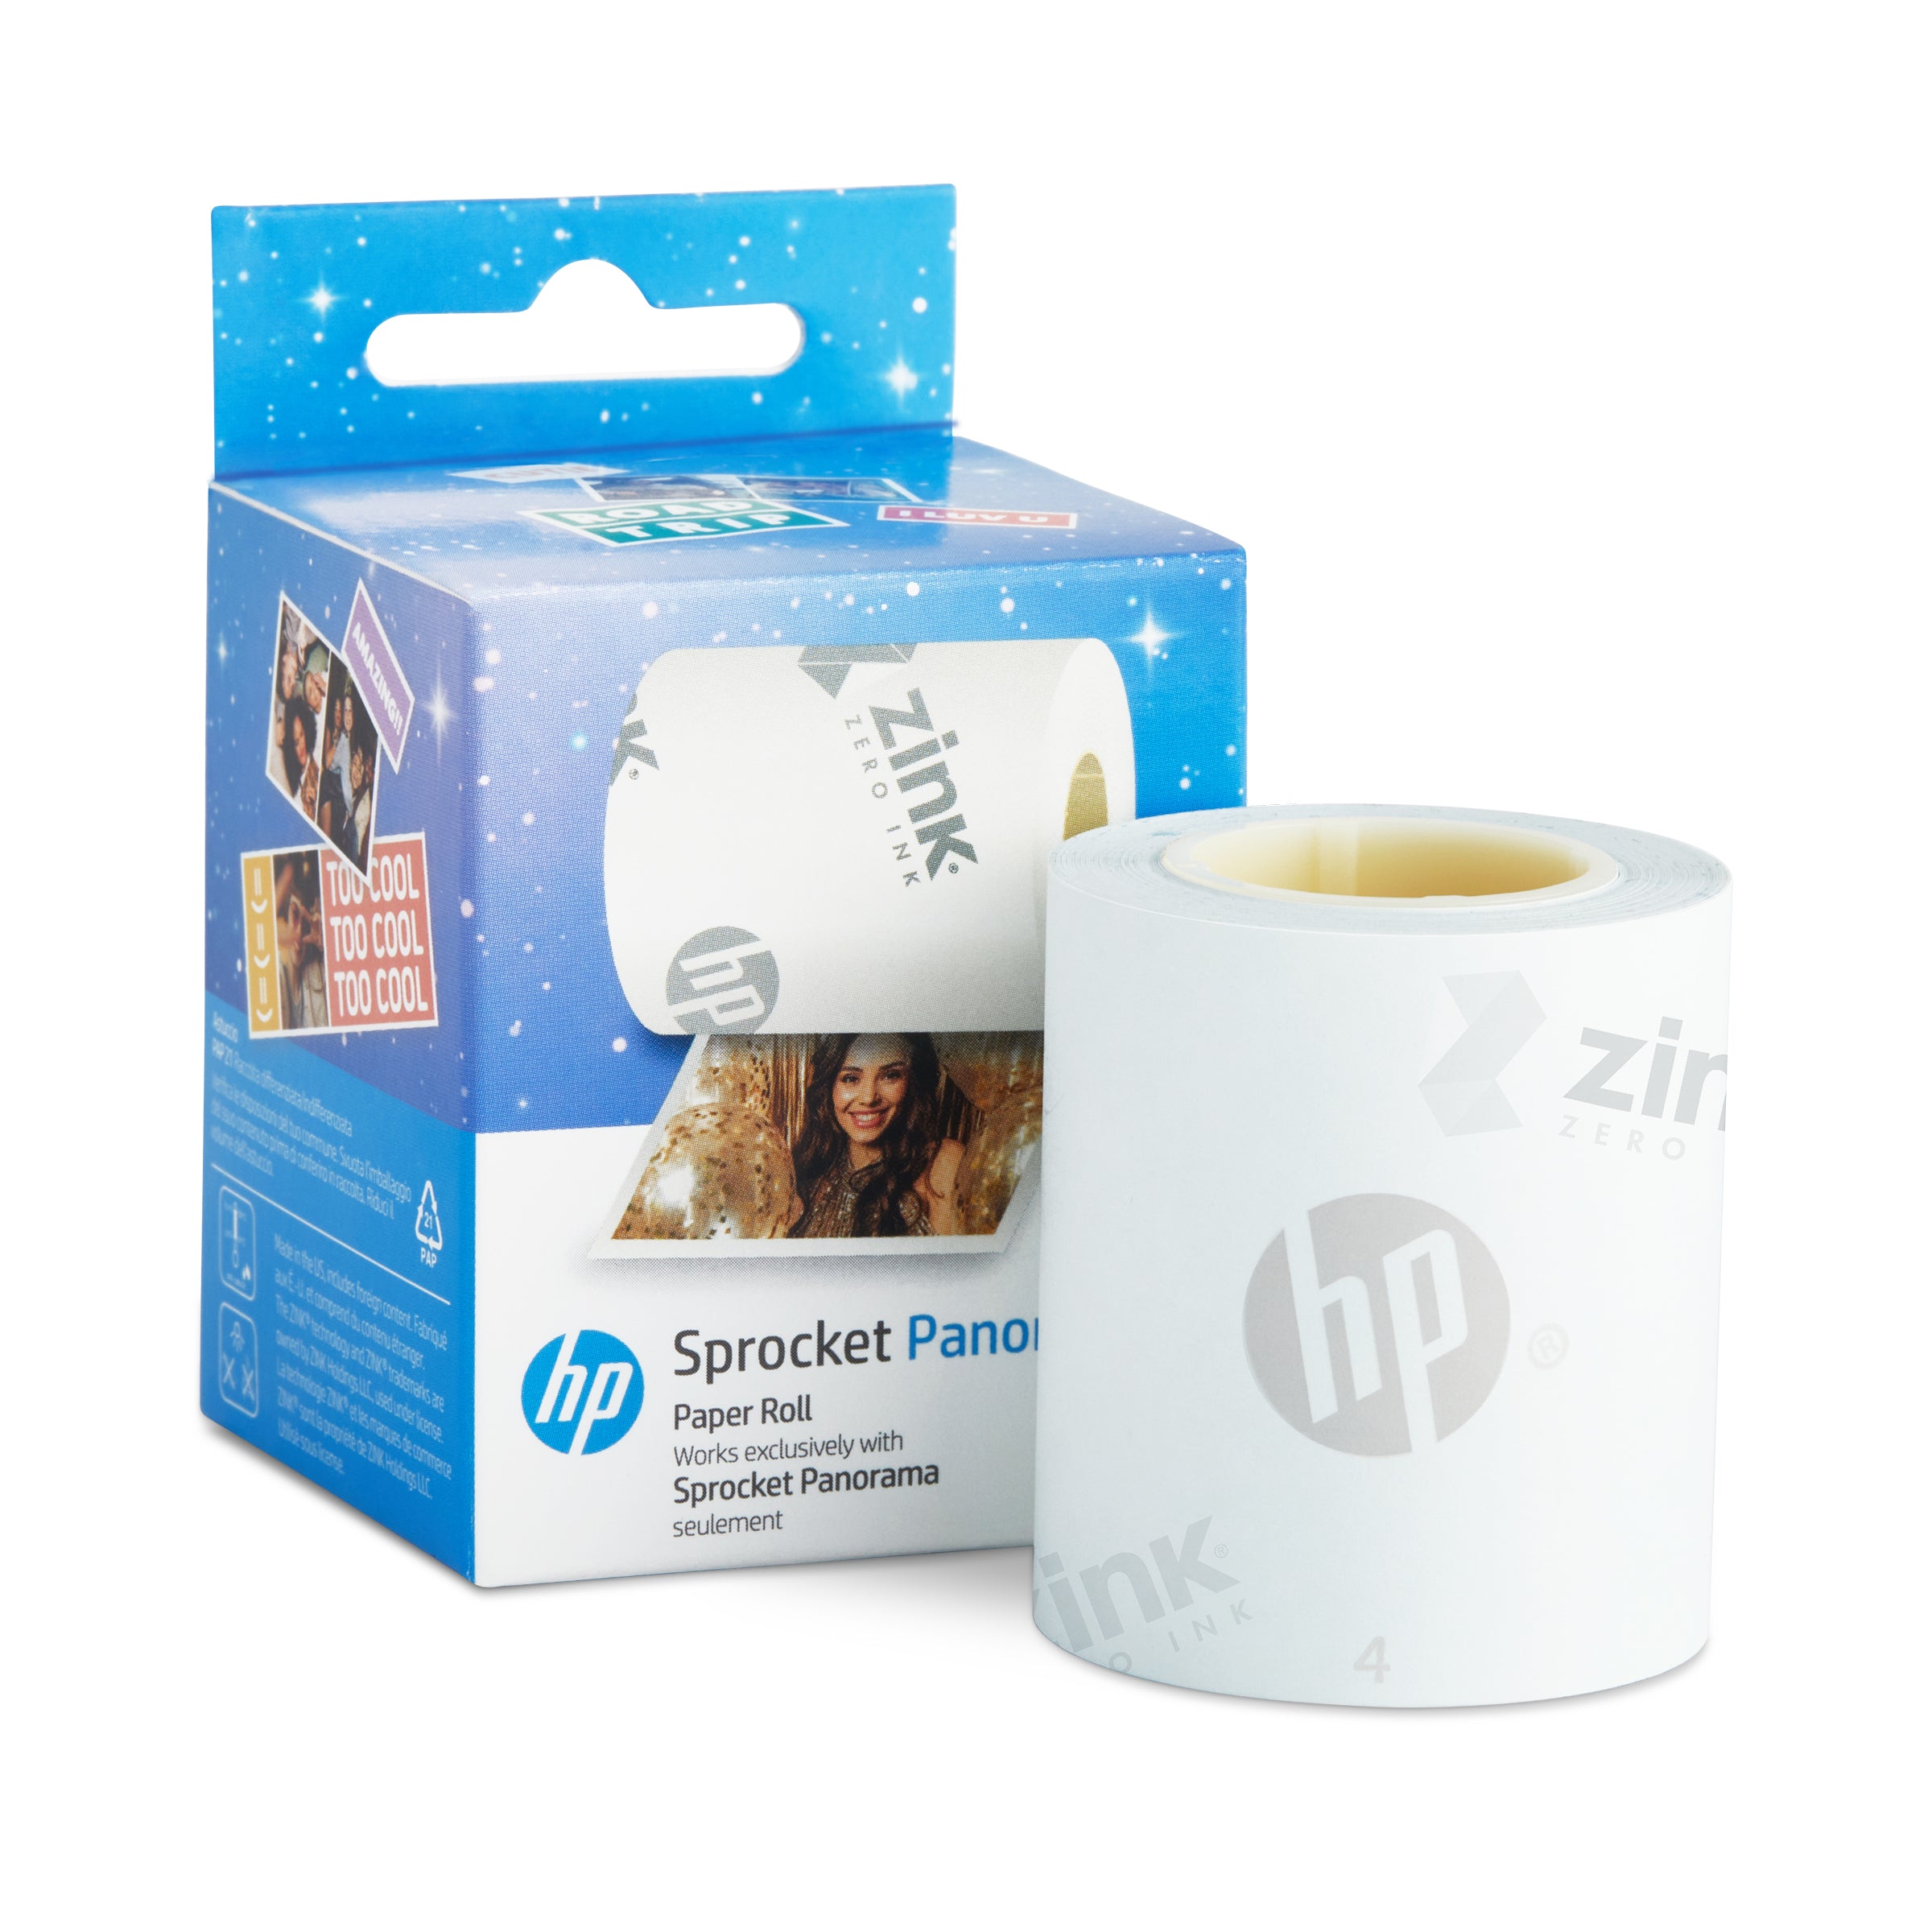 HP Sprocket Panorama Instant Portable Color Label & Photo Printer (Pink) Gift Bundle with case, HP Zink roll, photo album, markers, stickers and frames Sprocket Printers CA